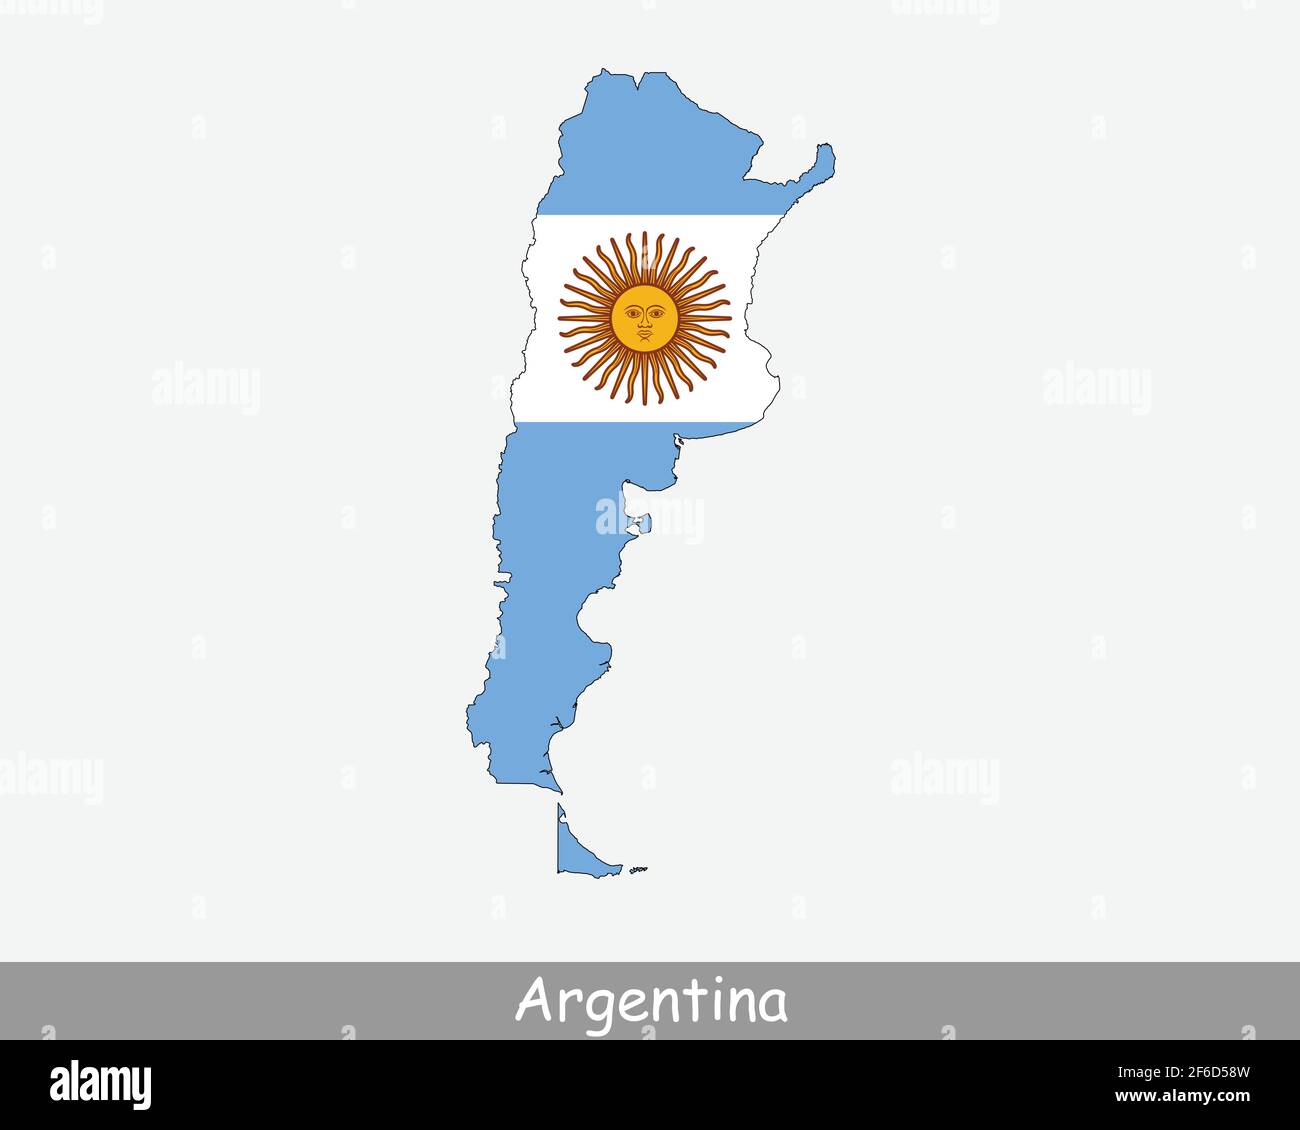 Argentinean Map Flag. Map of Argentina with the national flag of Argentina isolated on white background. Vector illustration. Stock Vector